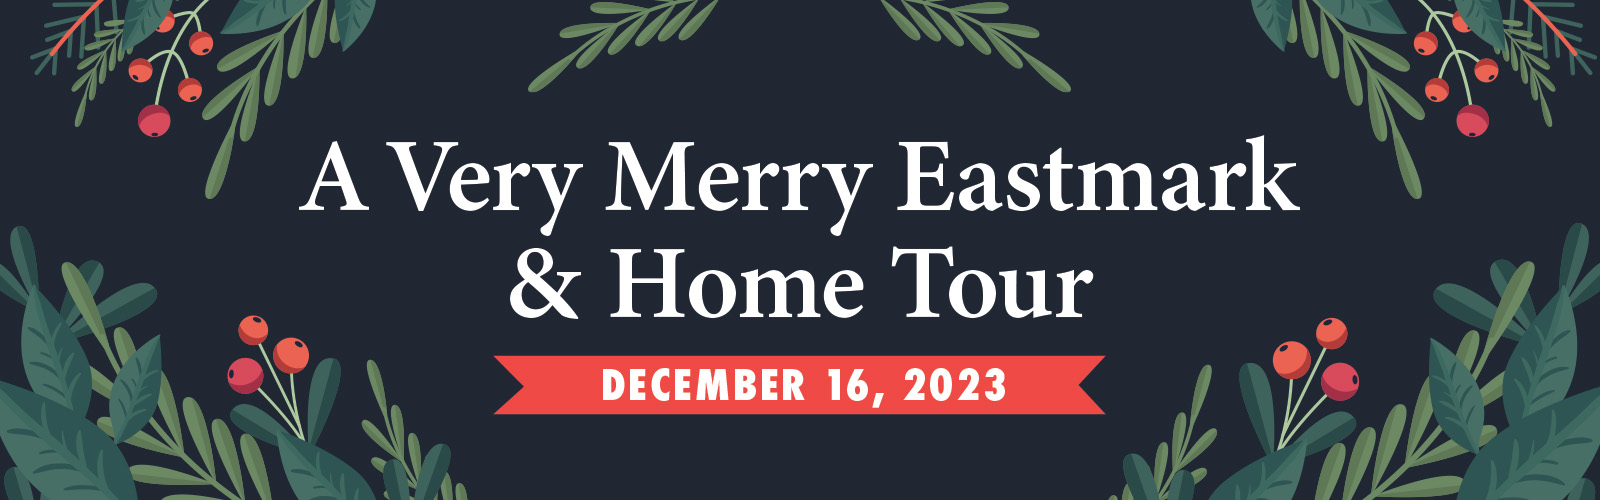 Experience the Magic of the Season at a Very Merry Eastmark & Home Tour